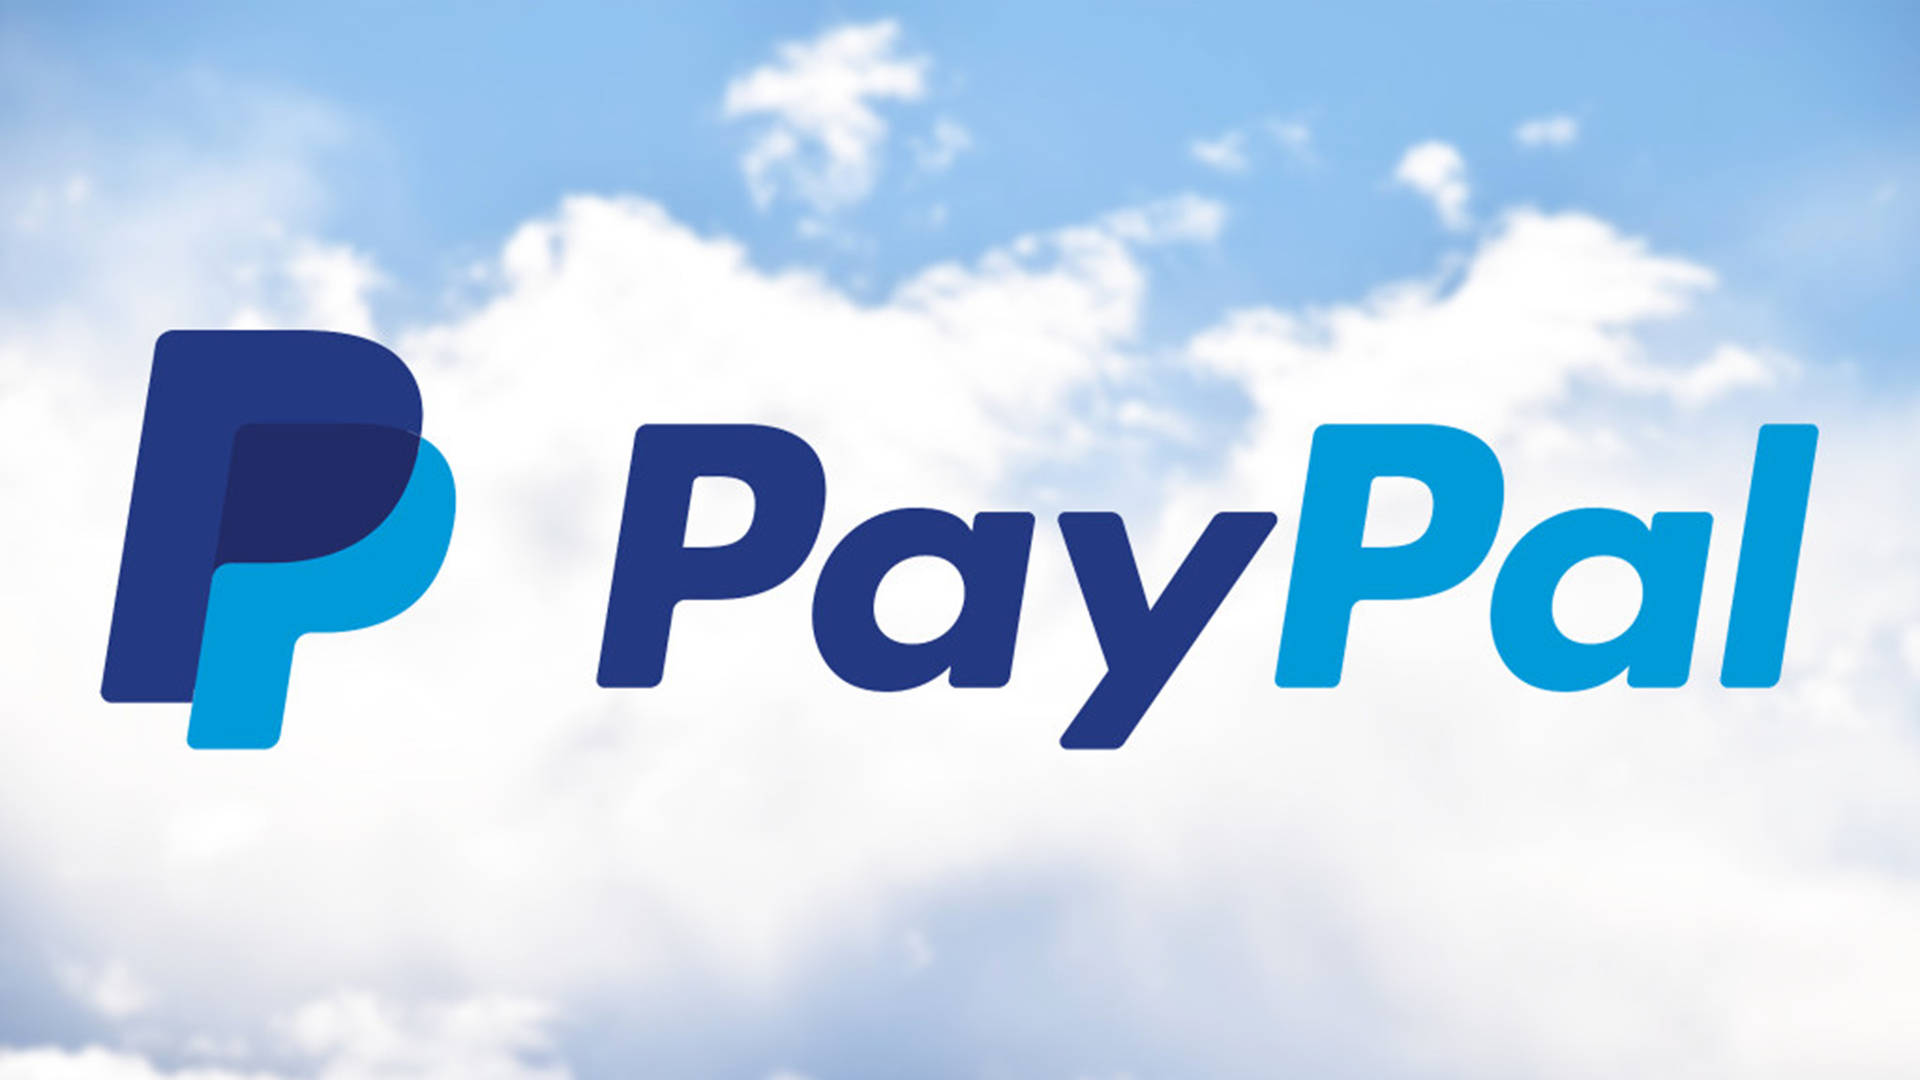 Paypal Logo With Clouds Background